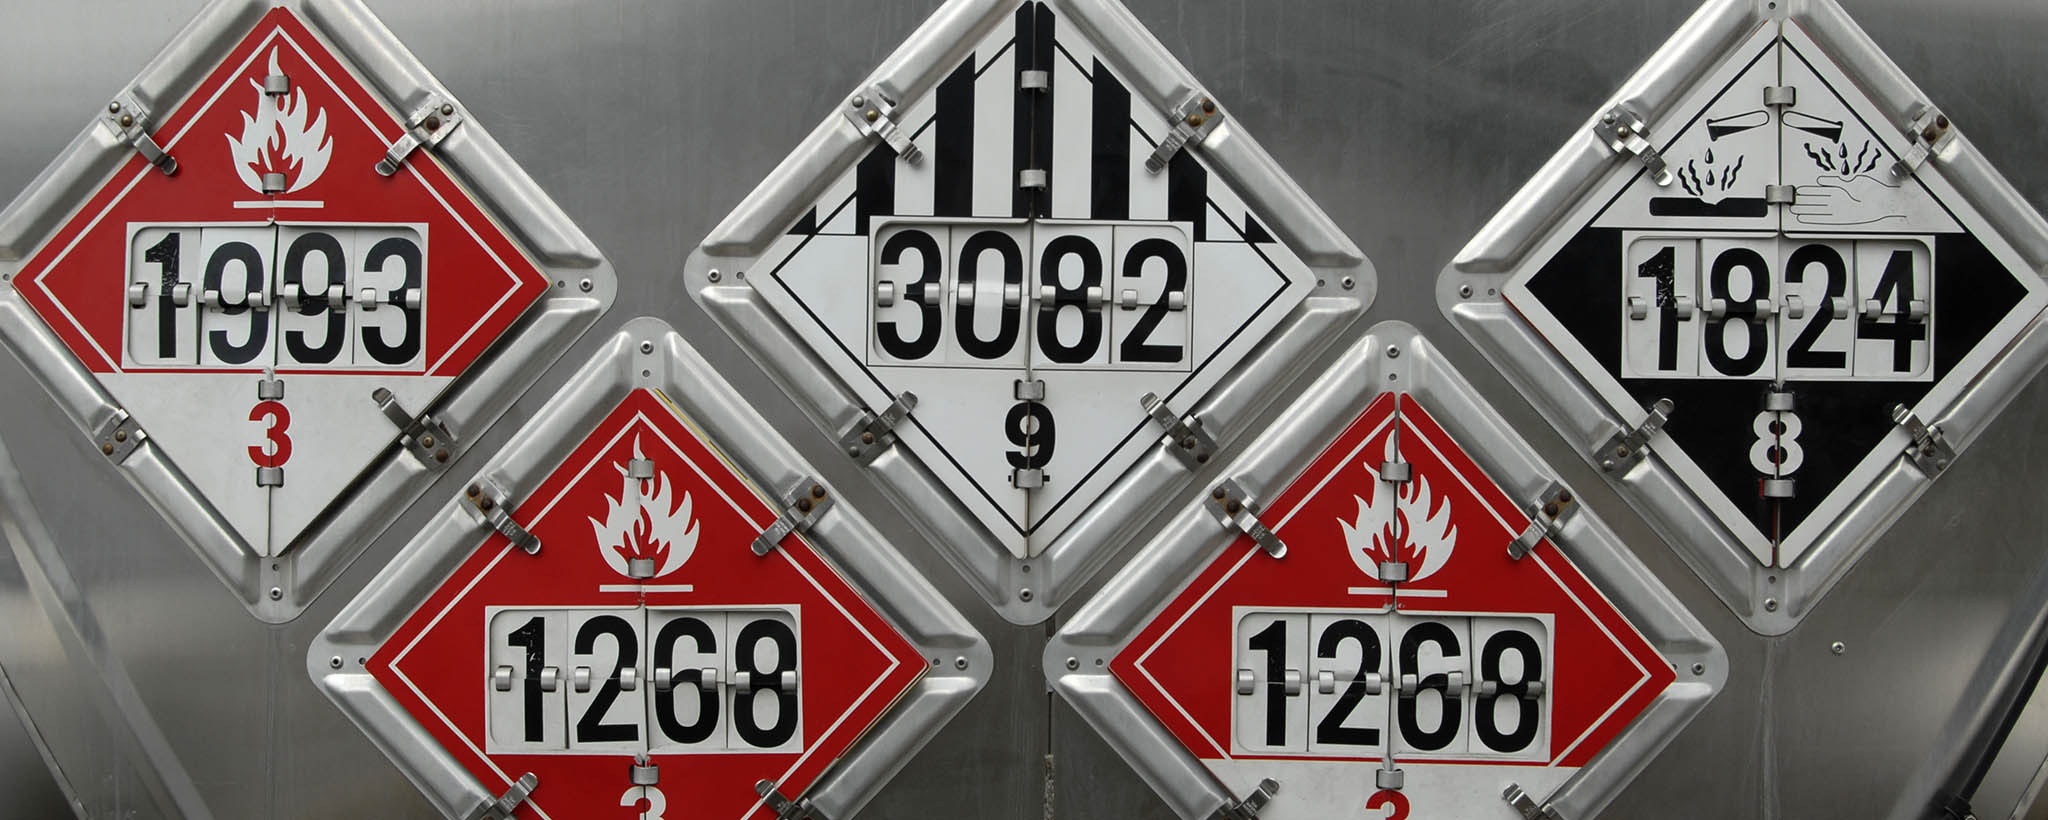 Five different hazardous materials signs showing different numbers and warnings